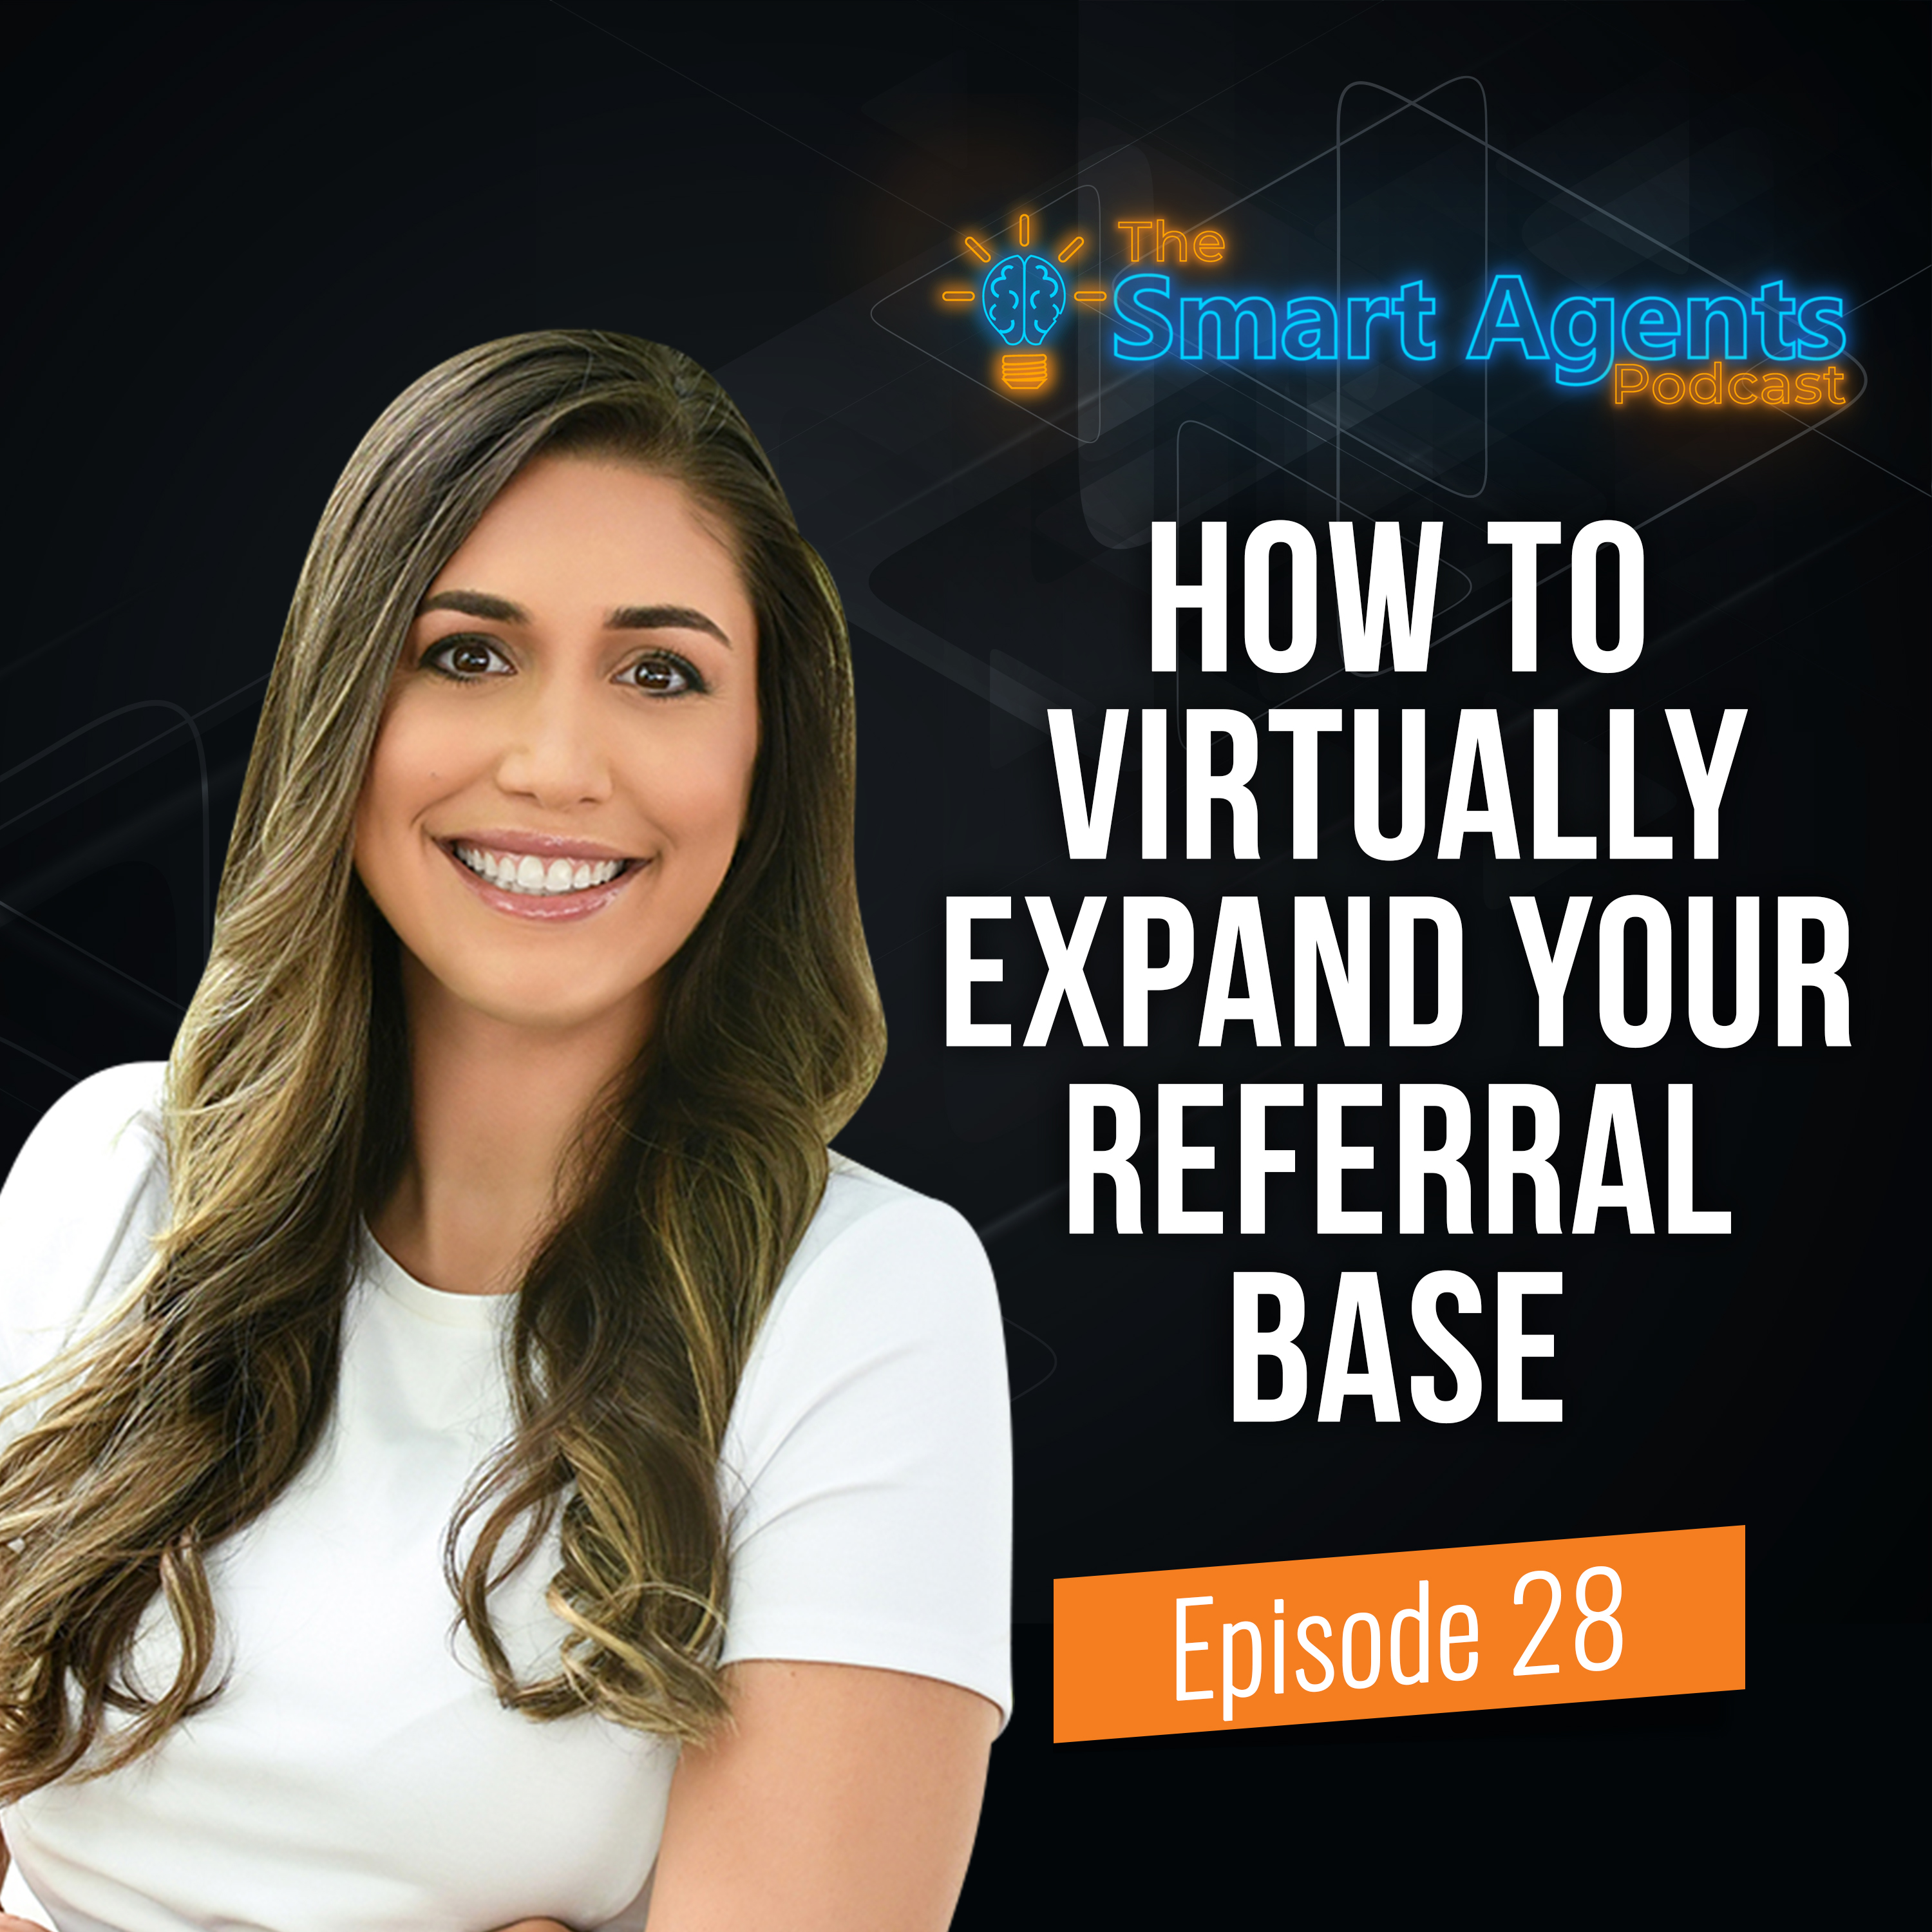 Episode 28: Joanna Grows Her Referral Base By Building A Virtual Team